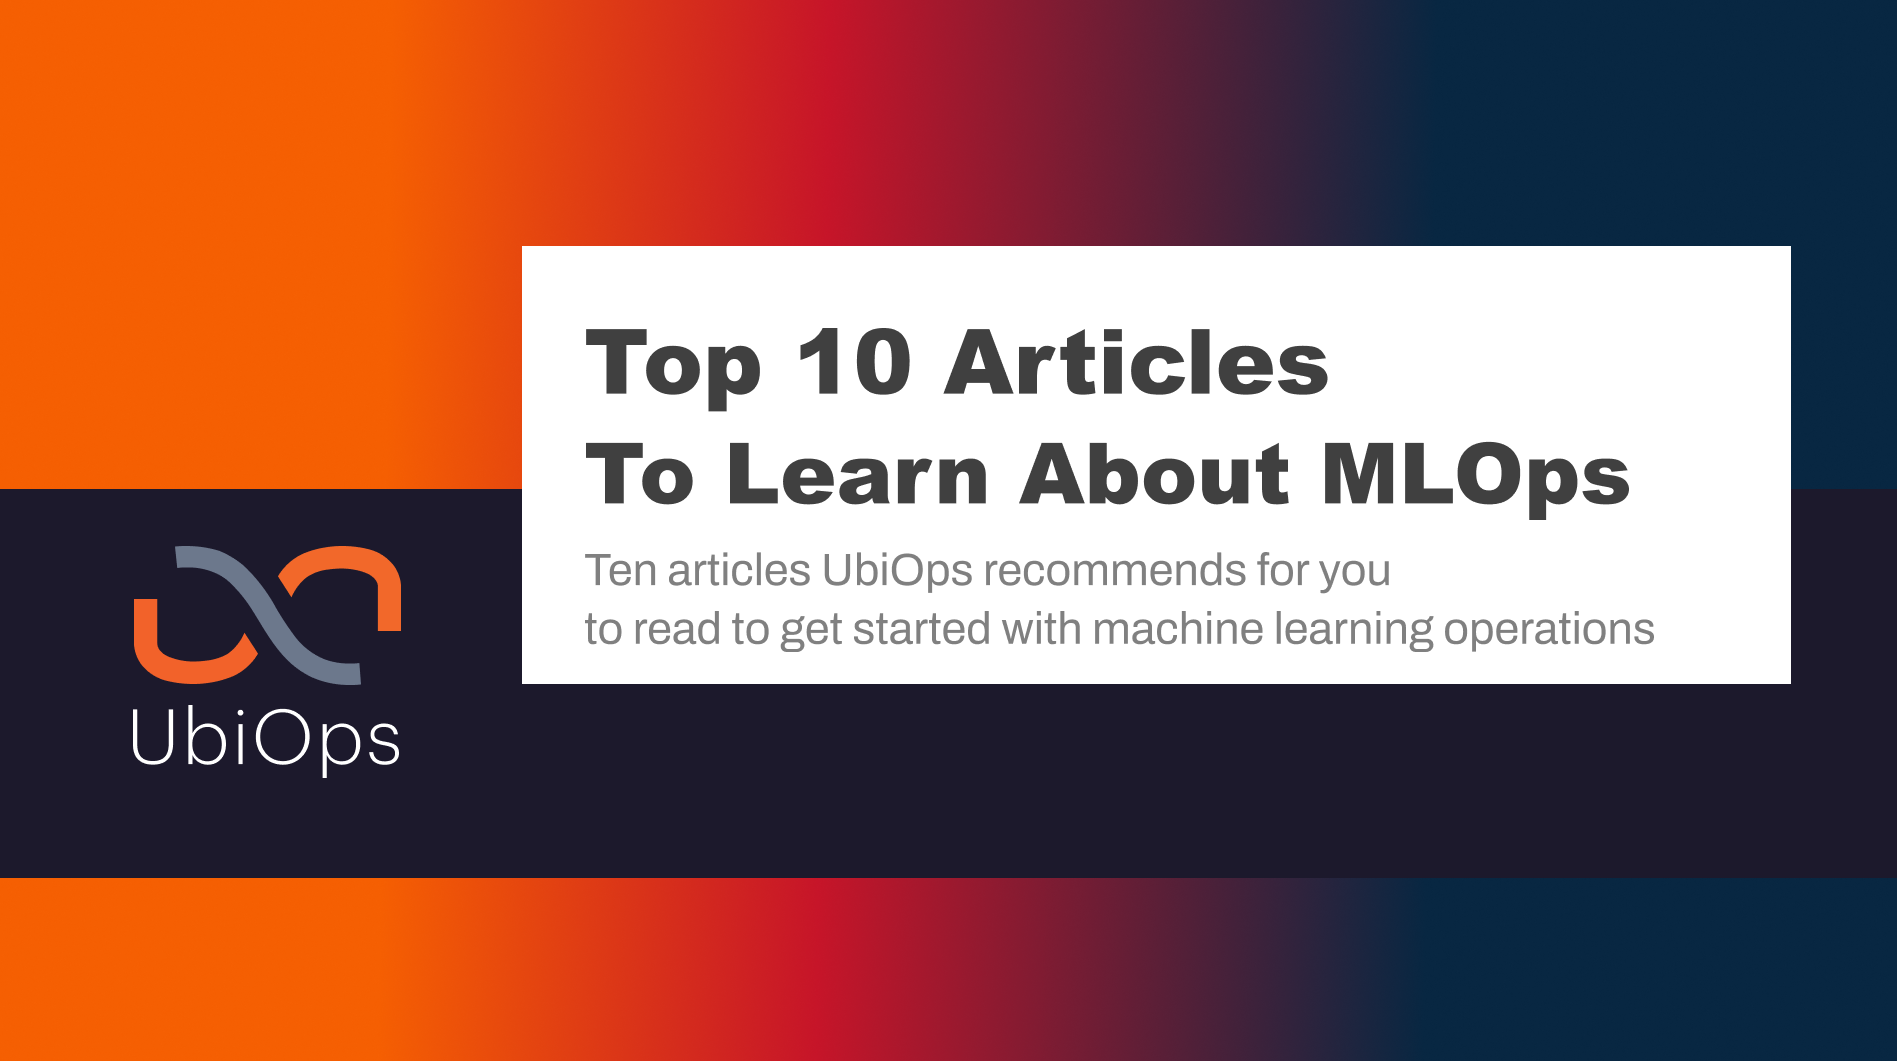 Ten articles UbiOps recommends for you to read to get started with machine learning operations (1)